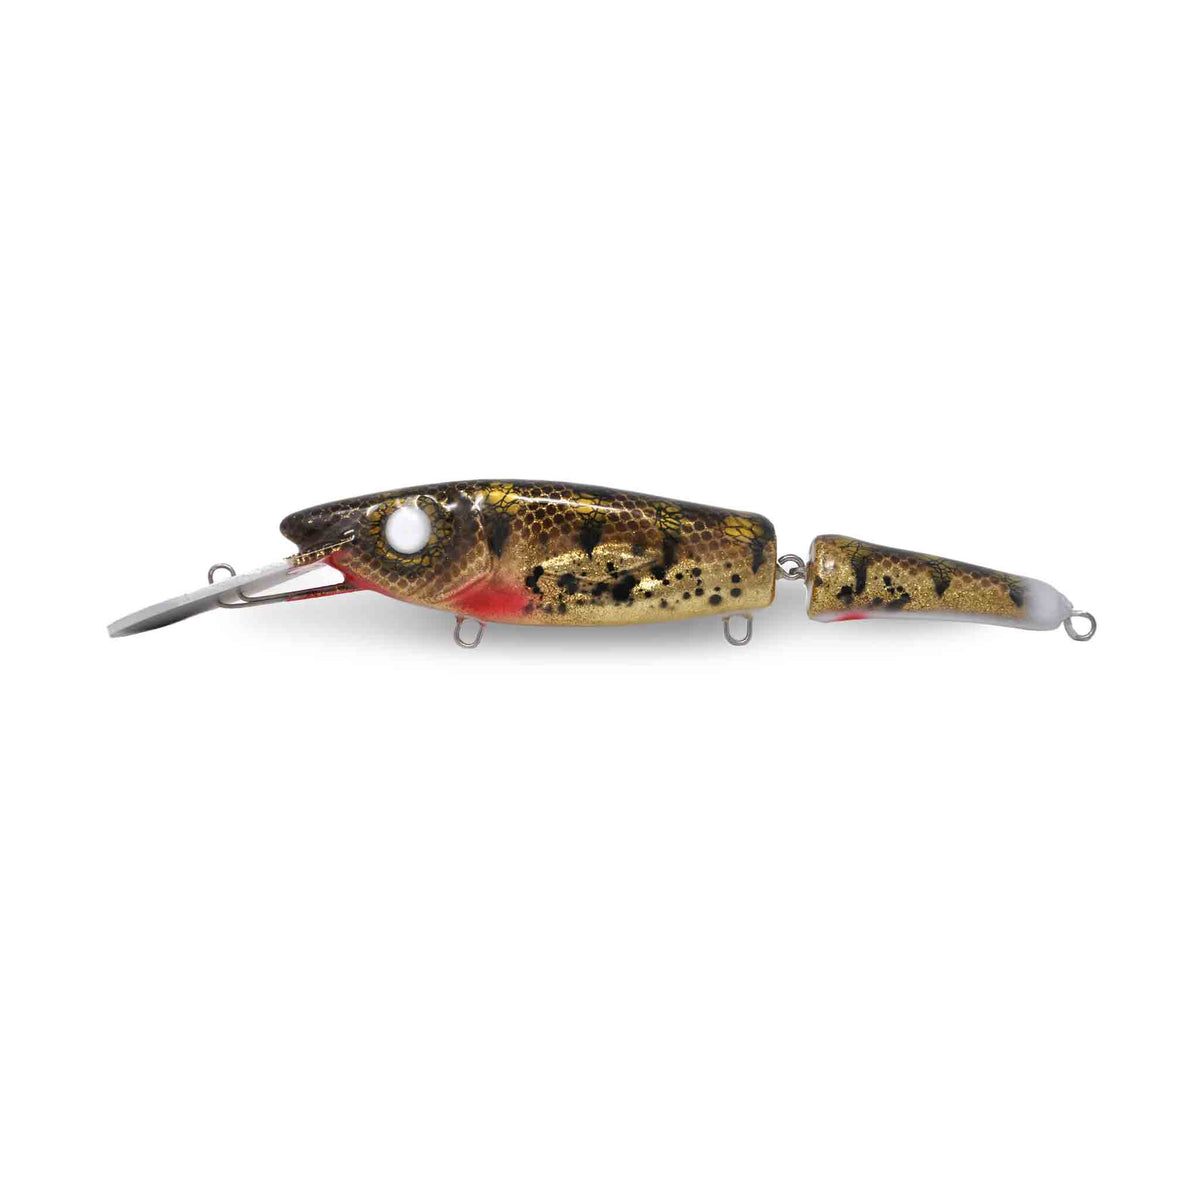 View of Crankbaits Scorpion MadBait Jointed 10'' Crankbait Walleye available at EZOKO Pike and Musky Shop